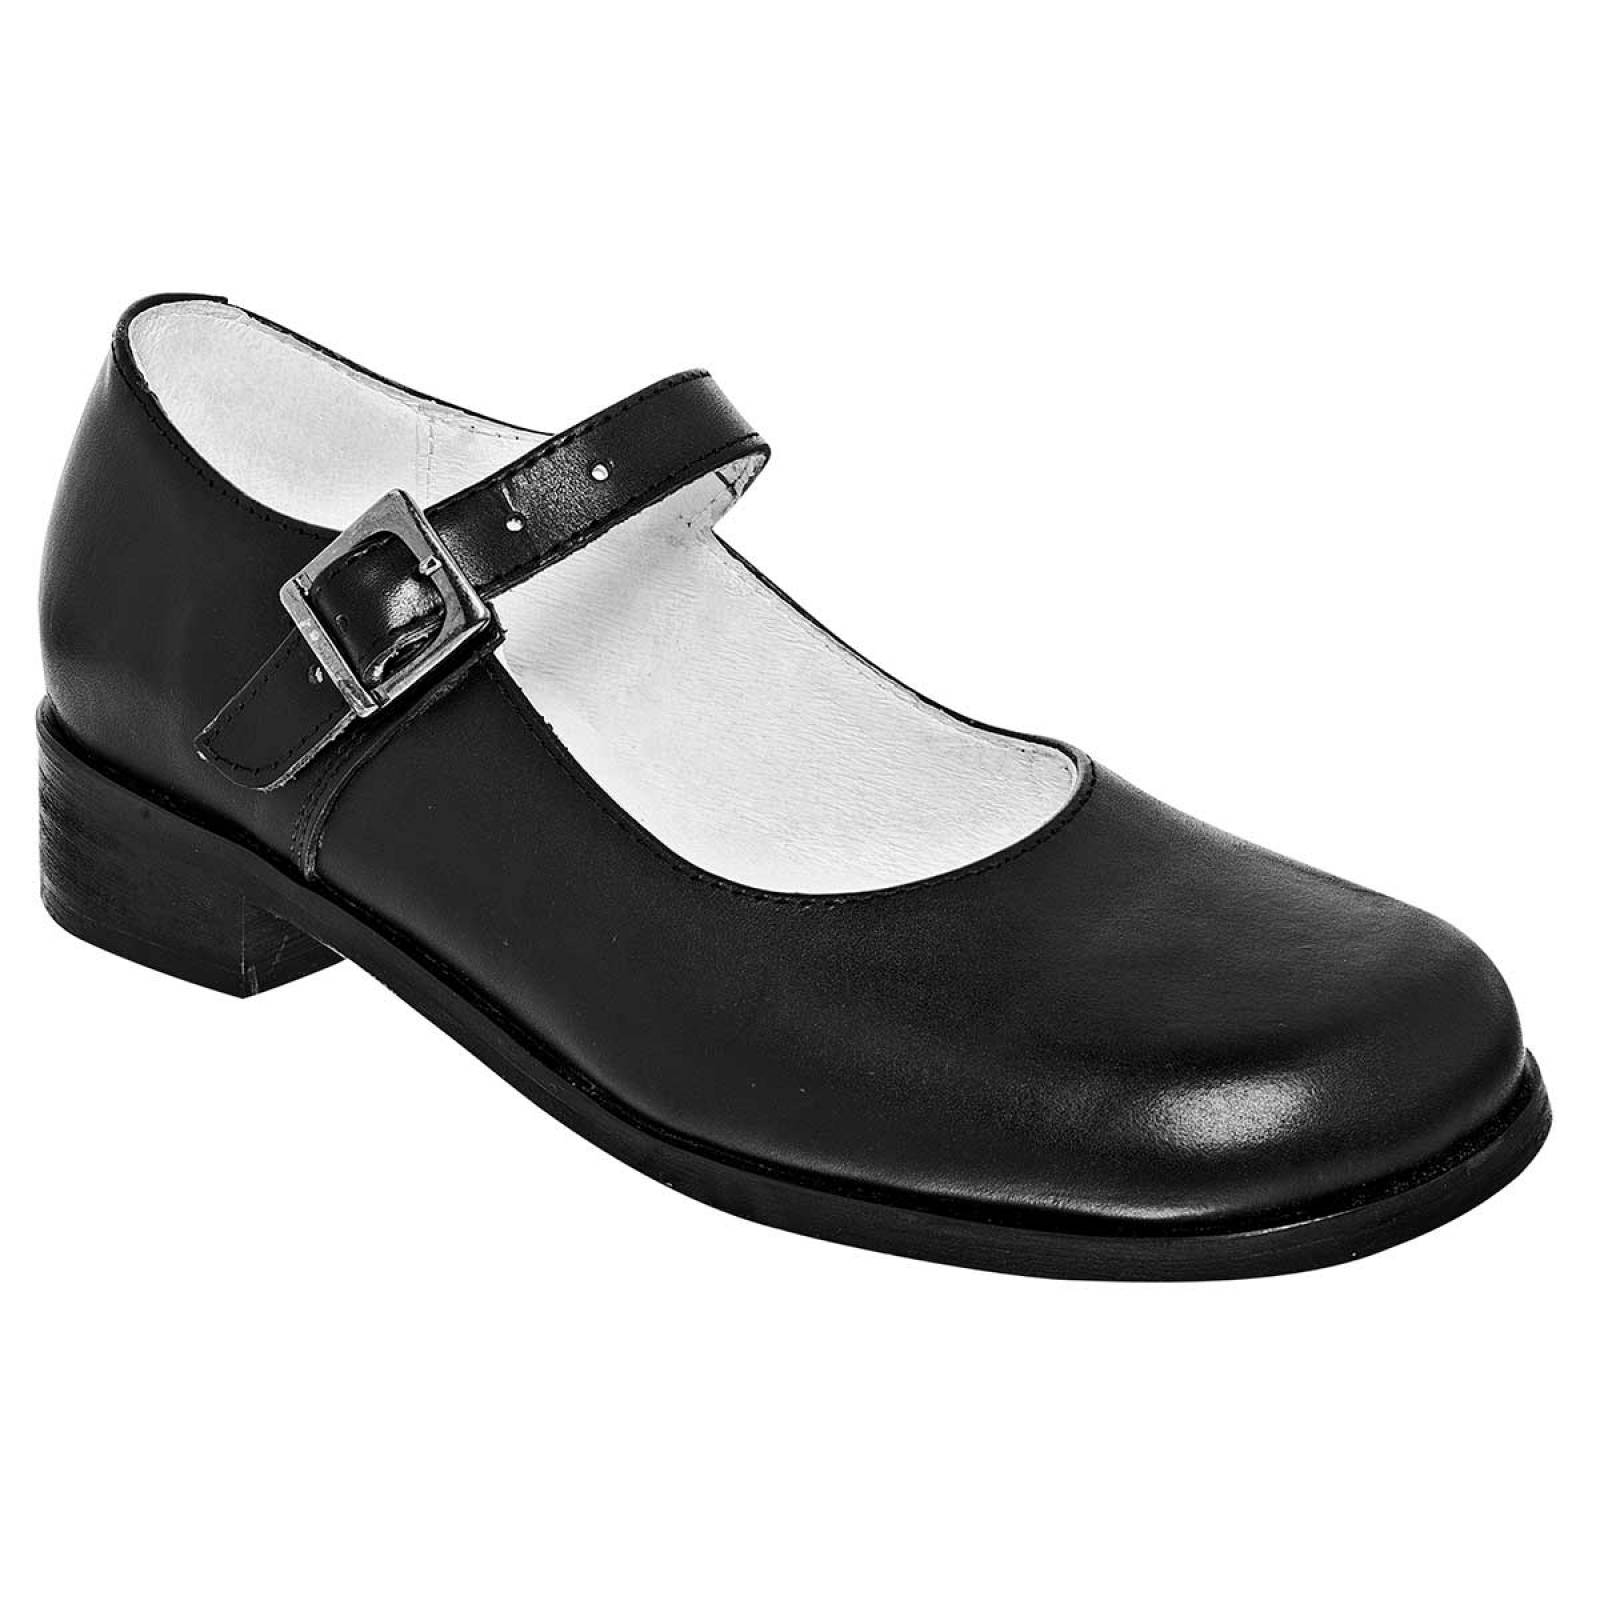 Ta-or-to Zapato Mujer Negro